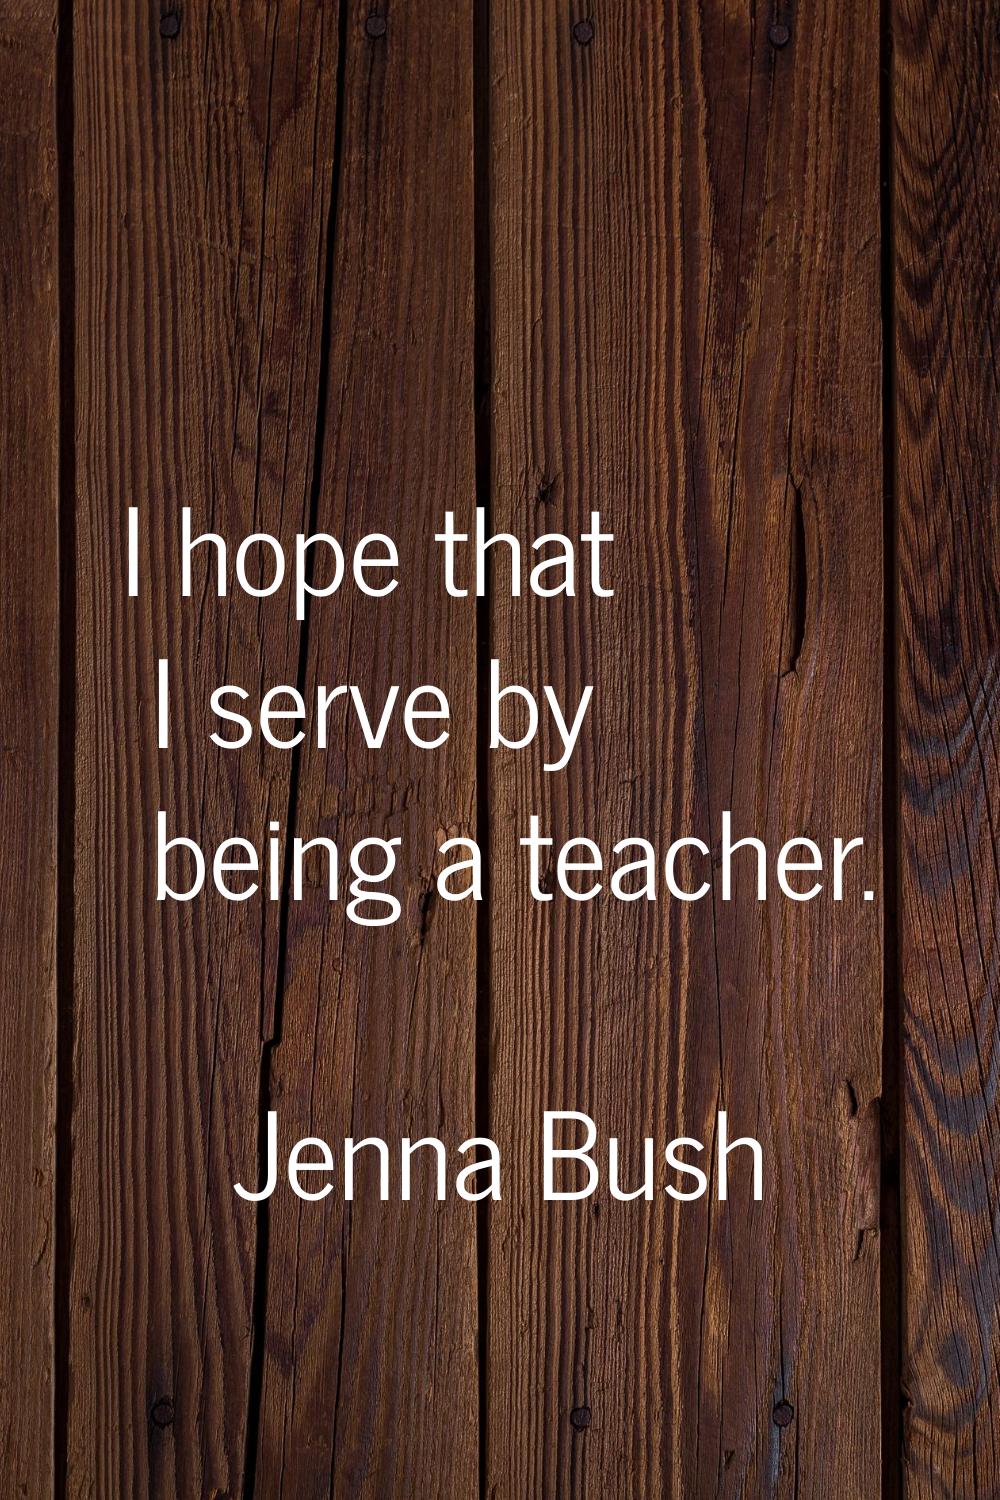 I hope that I serve by being a teacher.